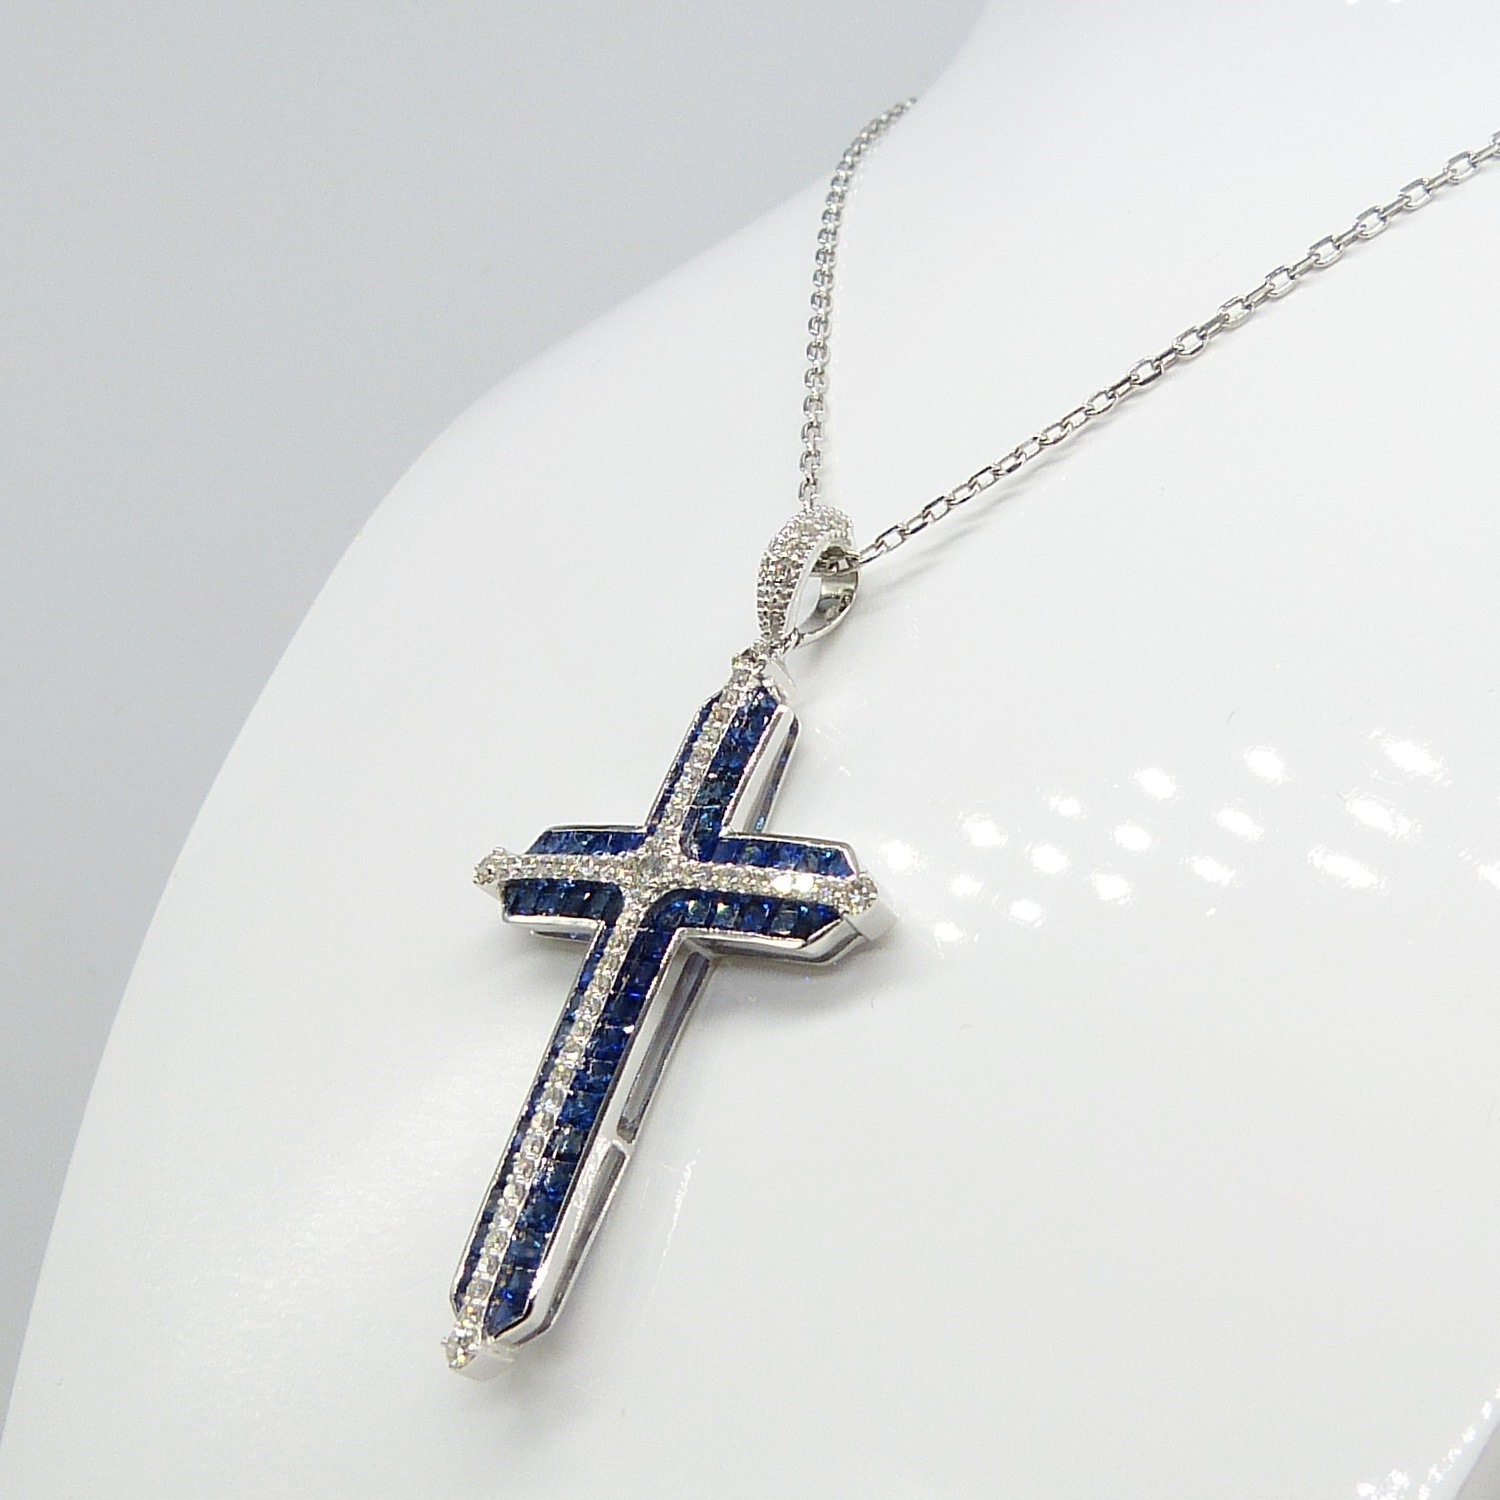 Impressive cross necklace set with natural sapphires and diamonds in 18ct white gold, boxed - Image 6 of 8